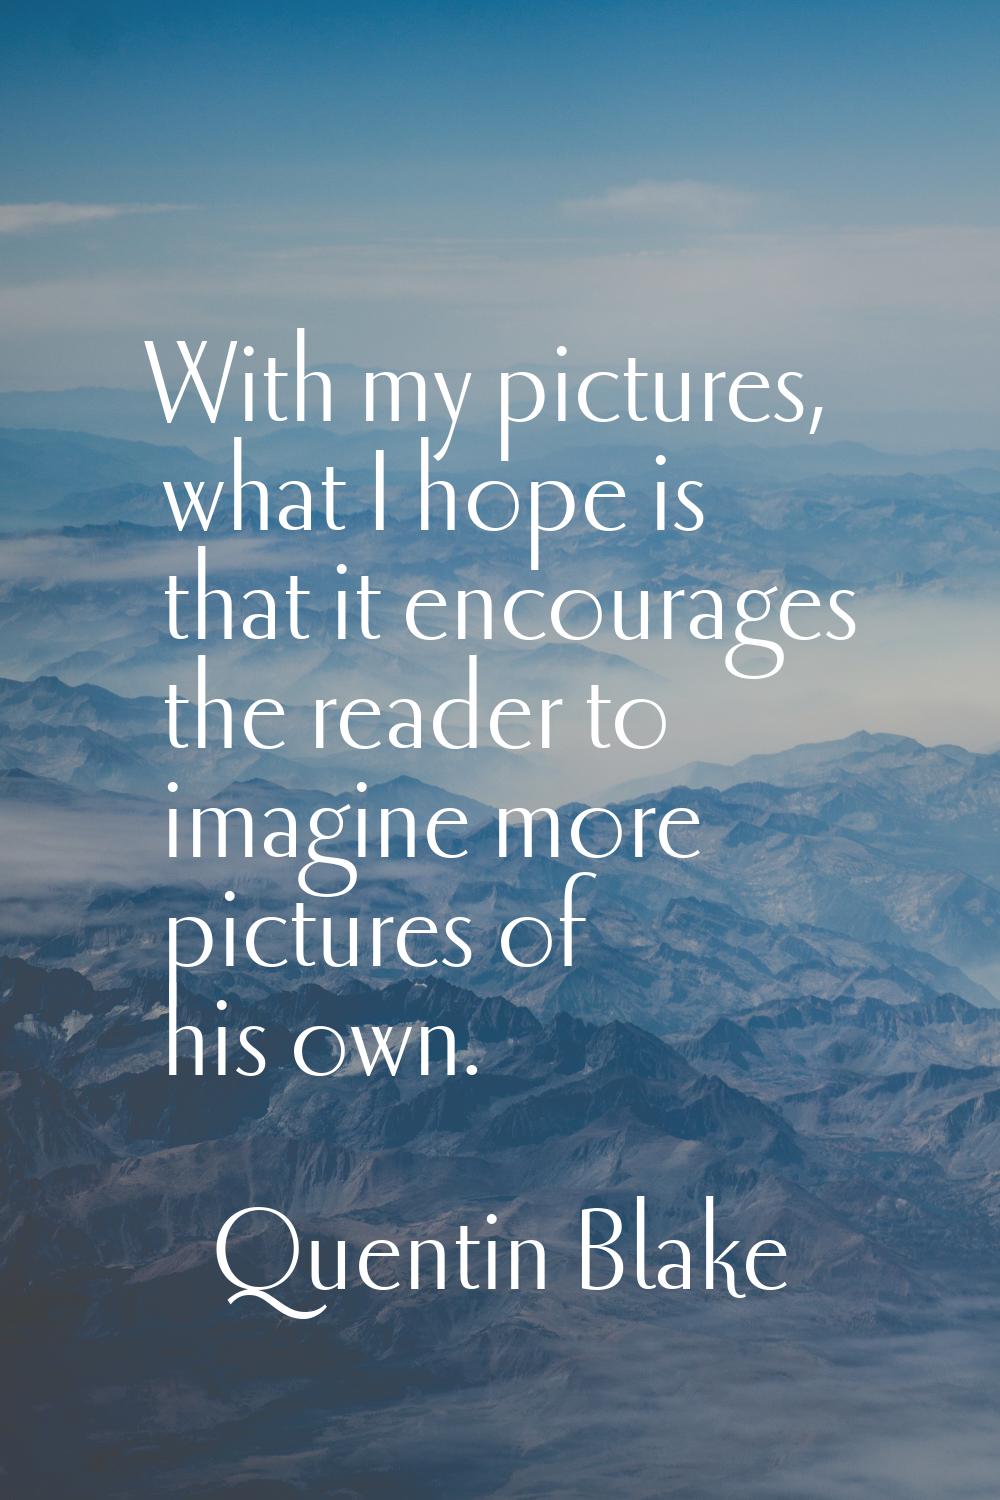 With my pictures, what I hope is that it encourages the reader to imagine more pictures of his own.